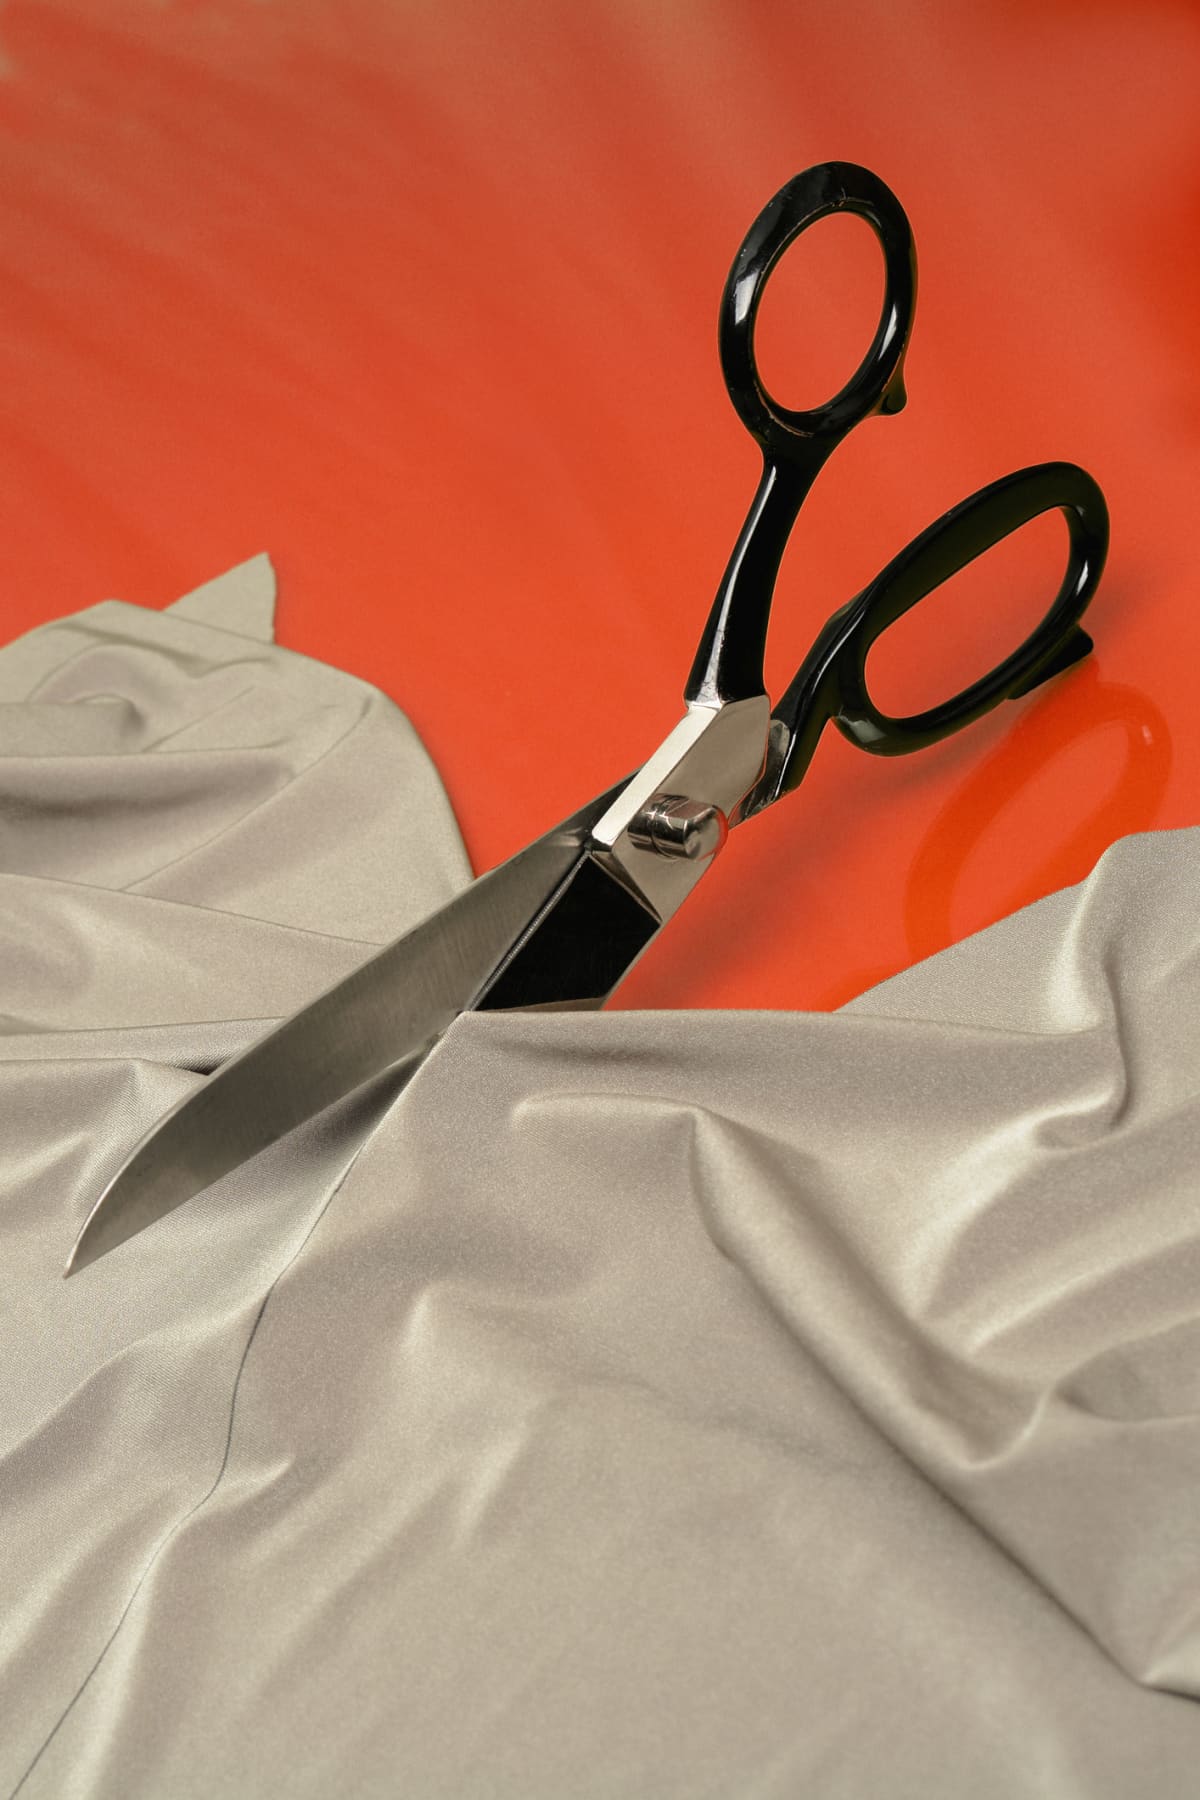 A pair of scissors cutting fabric against an orange background